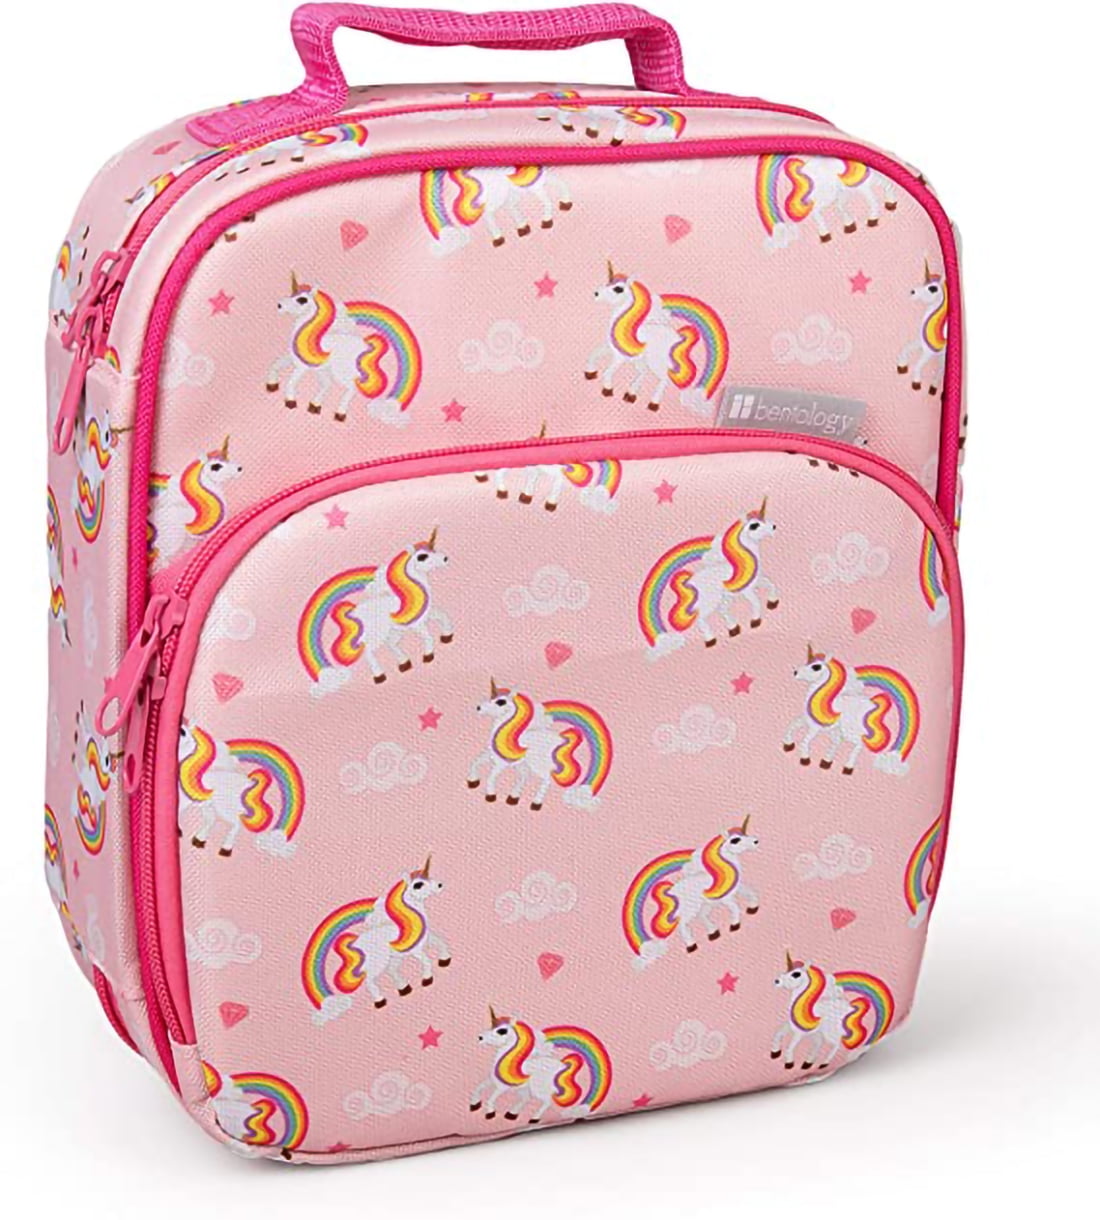 Bentology Lunch Box for Kids - Girls and Boys Insulated Lunchbox Bag Tote -  Fits Bento Boxes - Unicorn 